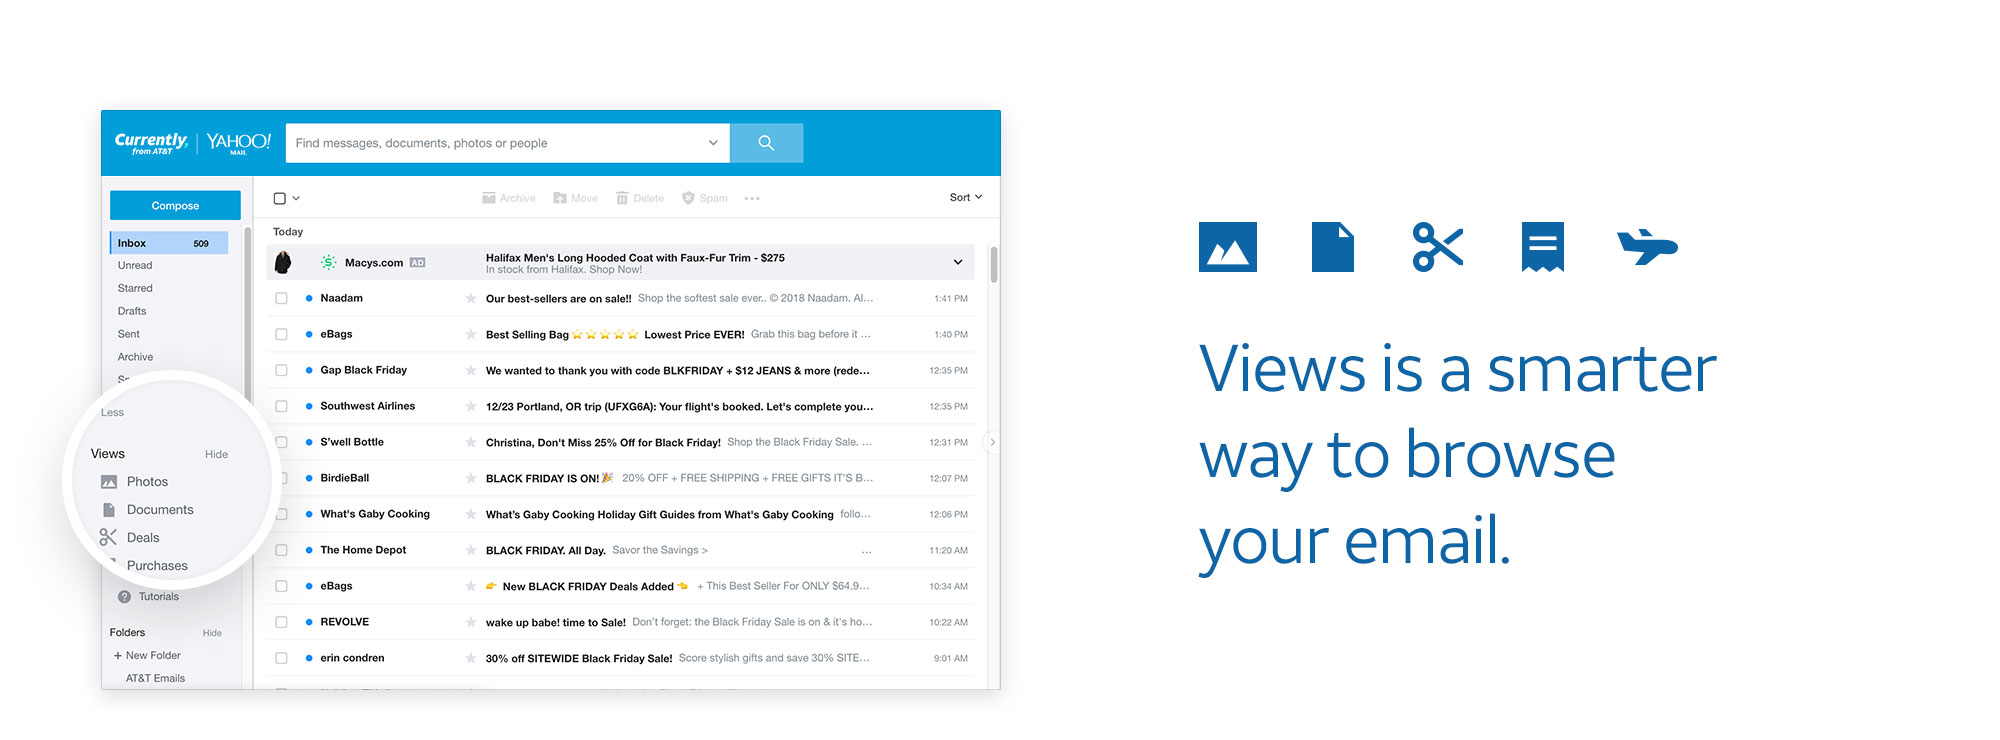 Smarter ways to browse your emails with Currently, from AT&T email